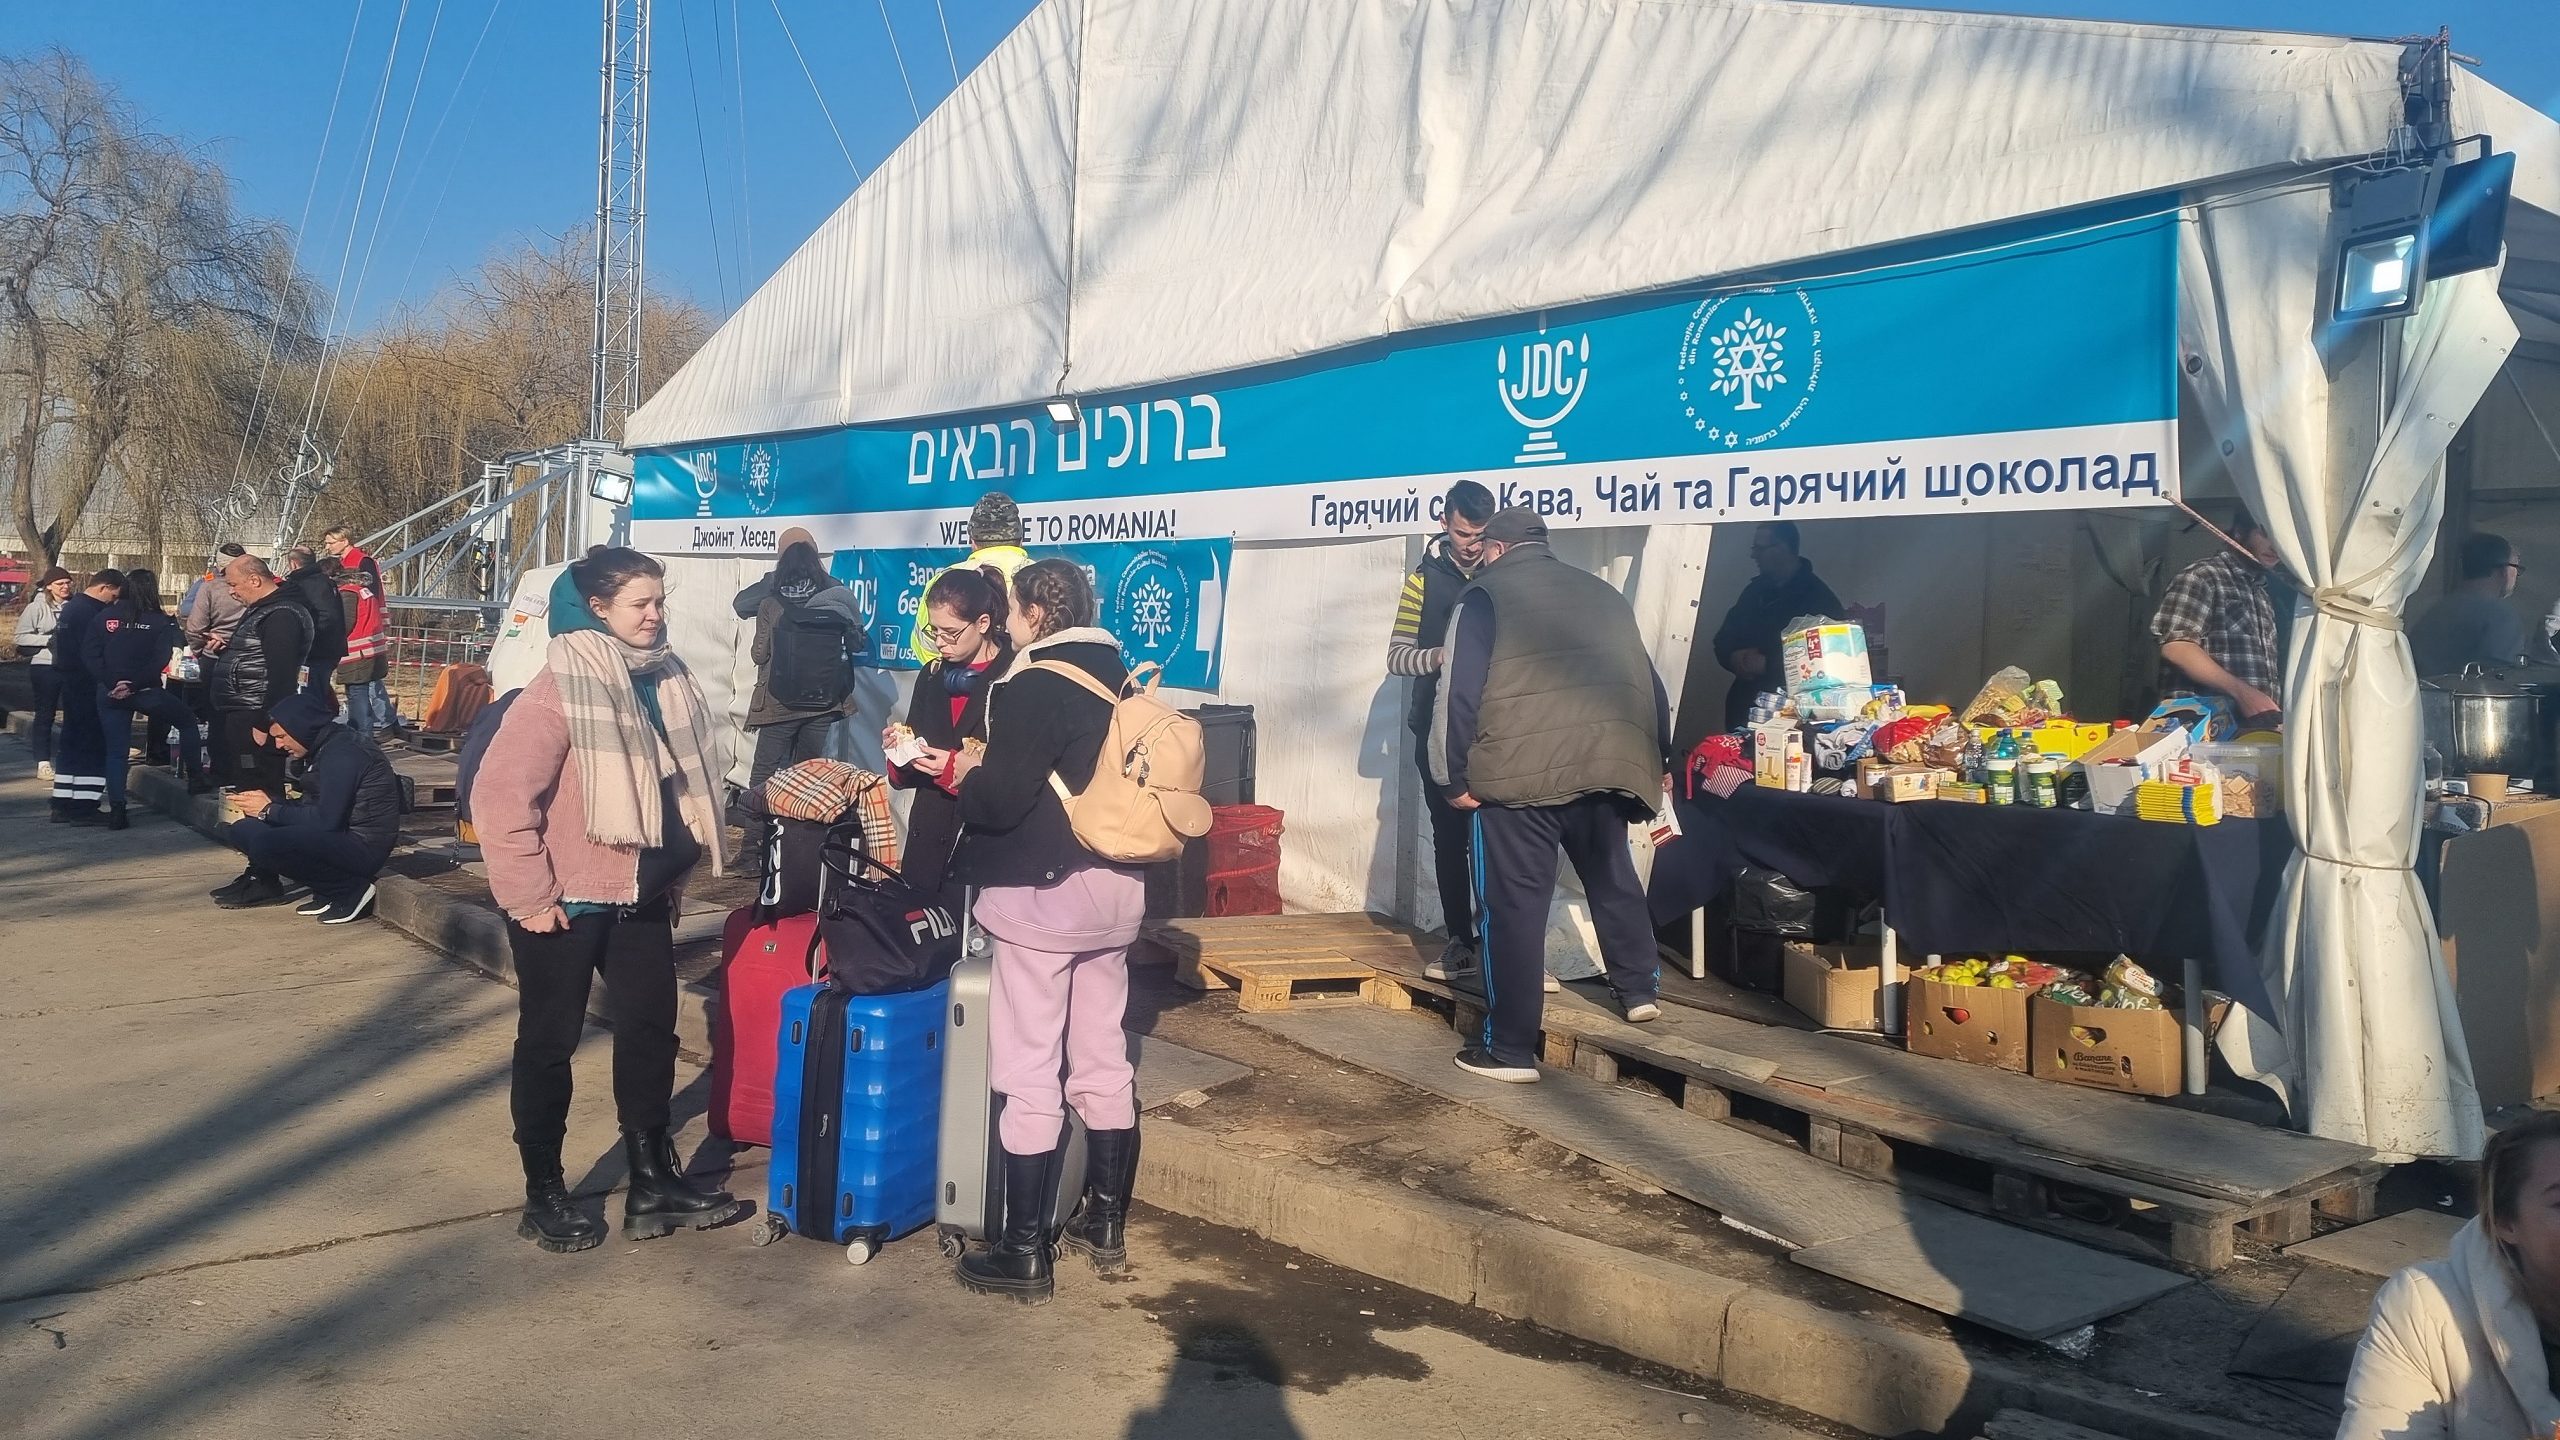 Jews, Muslims and Christians Band Together To Help Ukrainian Refugees (VIDEO REPORT)